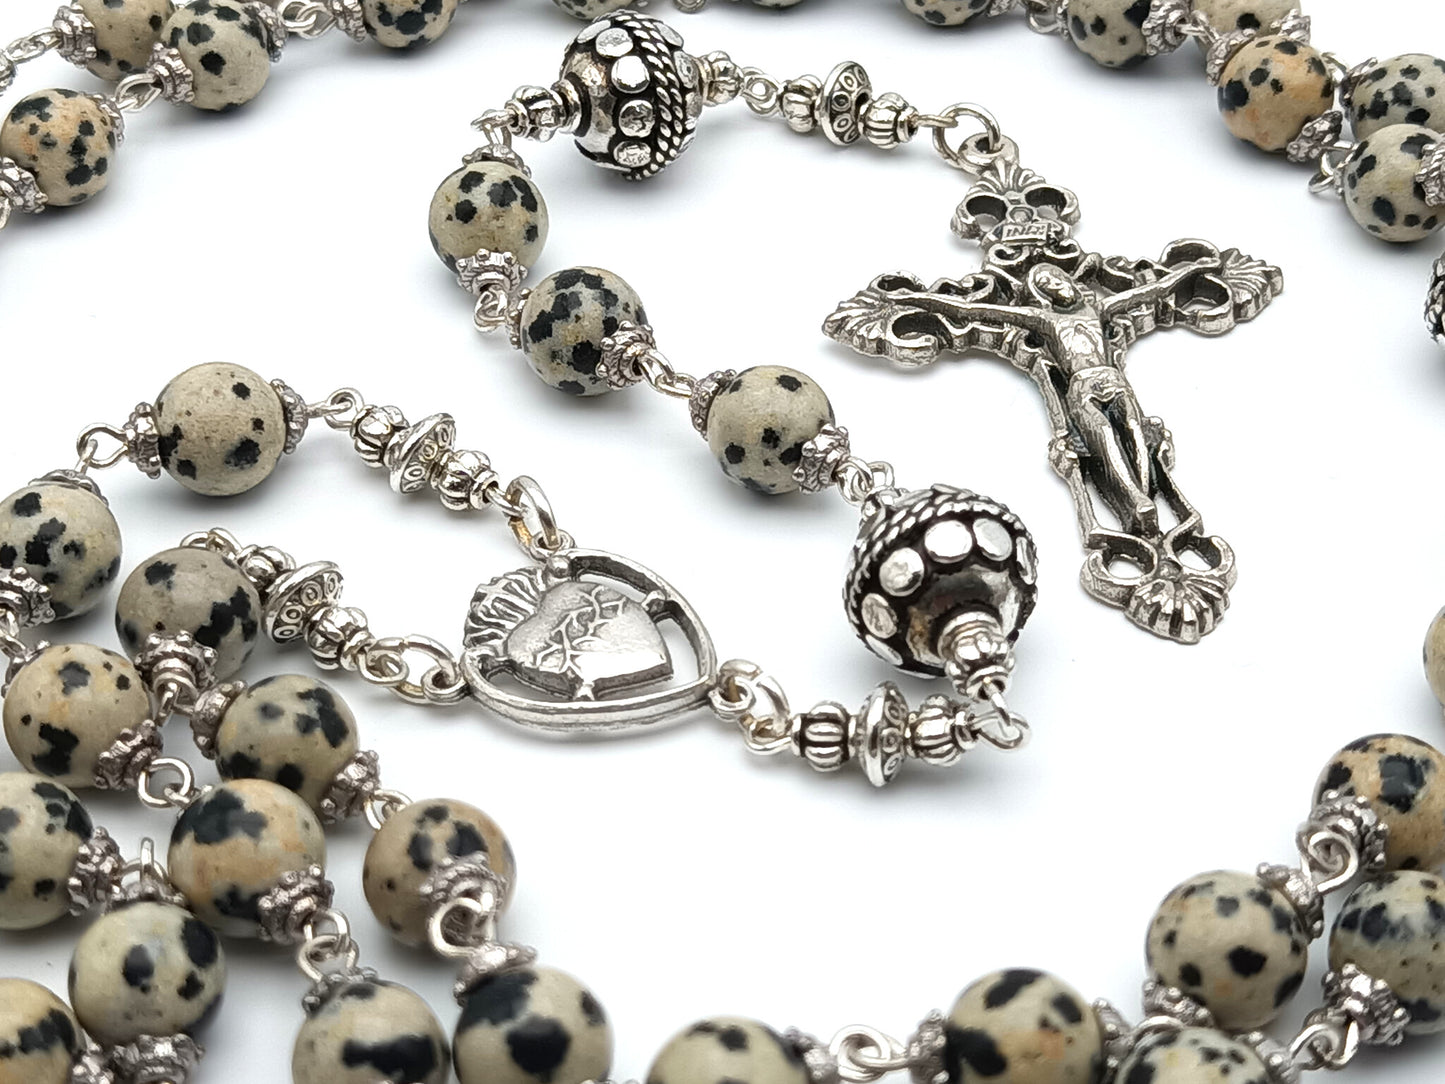 Sacred Heart of Jesus unique rosary beads with gemstone beads, silver crucifix, pater beads and centre medal.